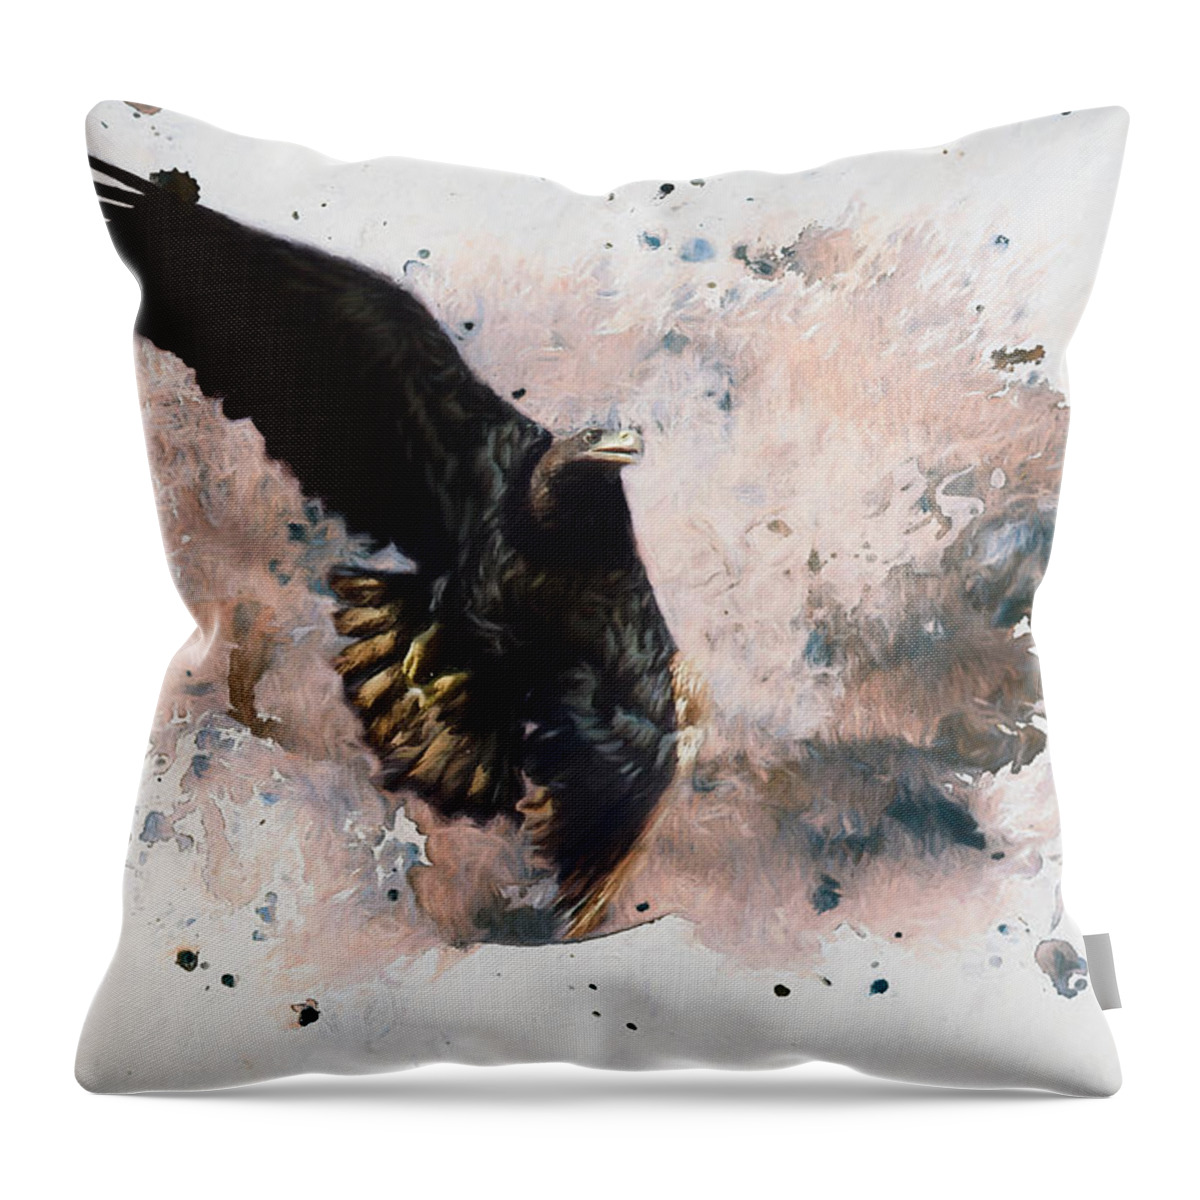 Textures Throw Pillow featuring the photograph On The Move by Evelyn Garcia